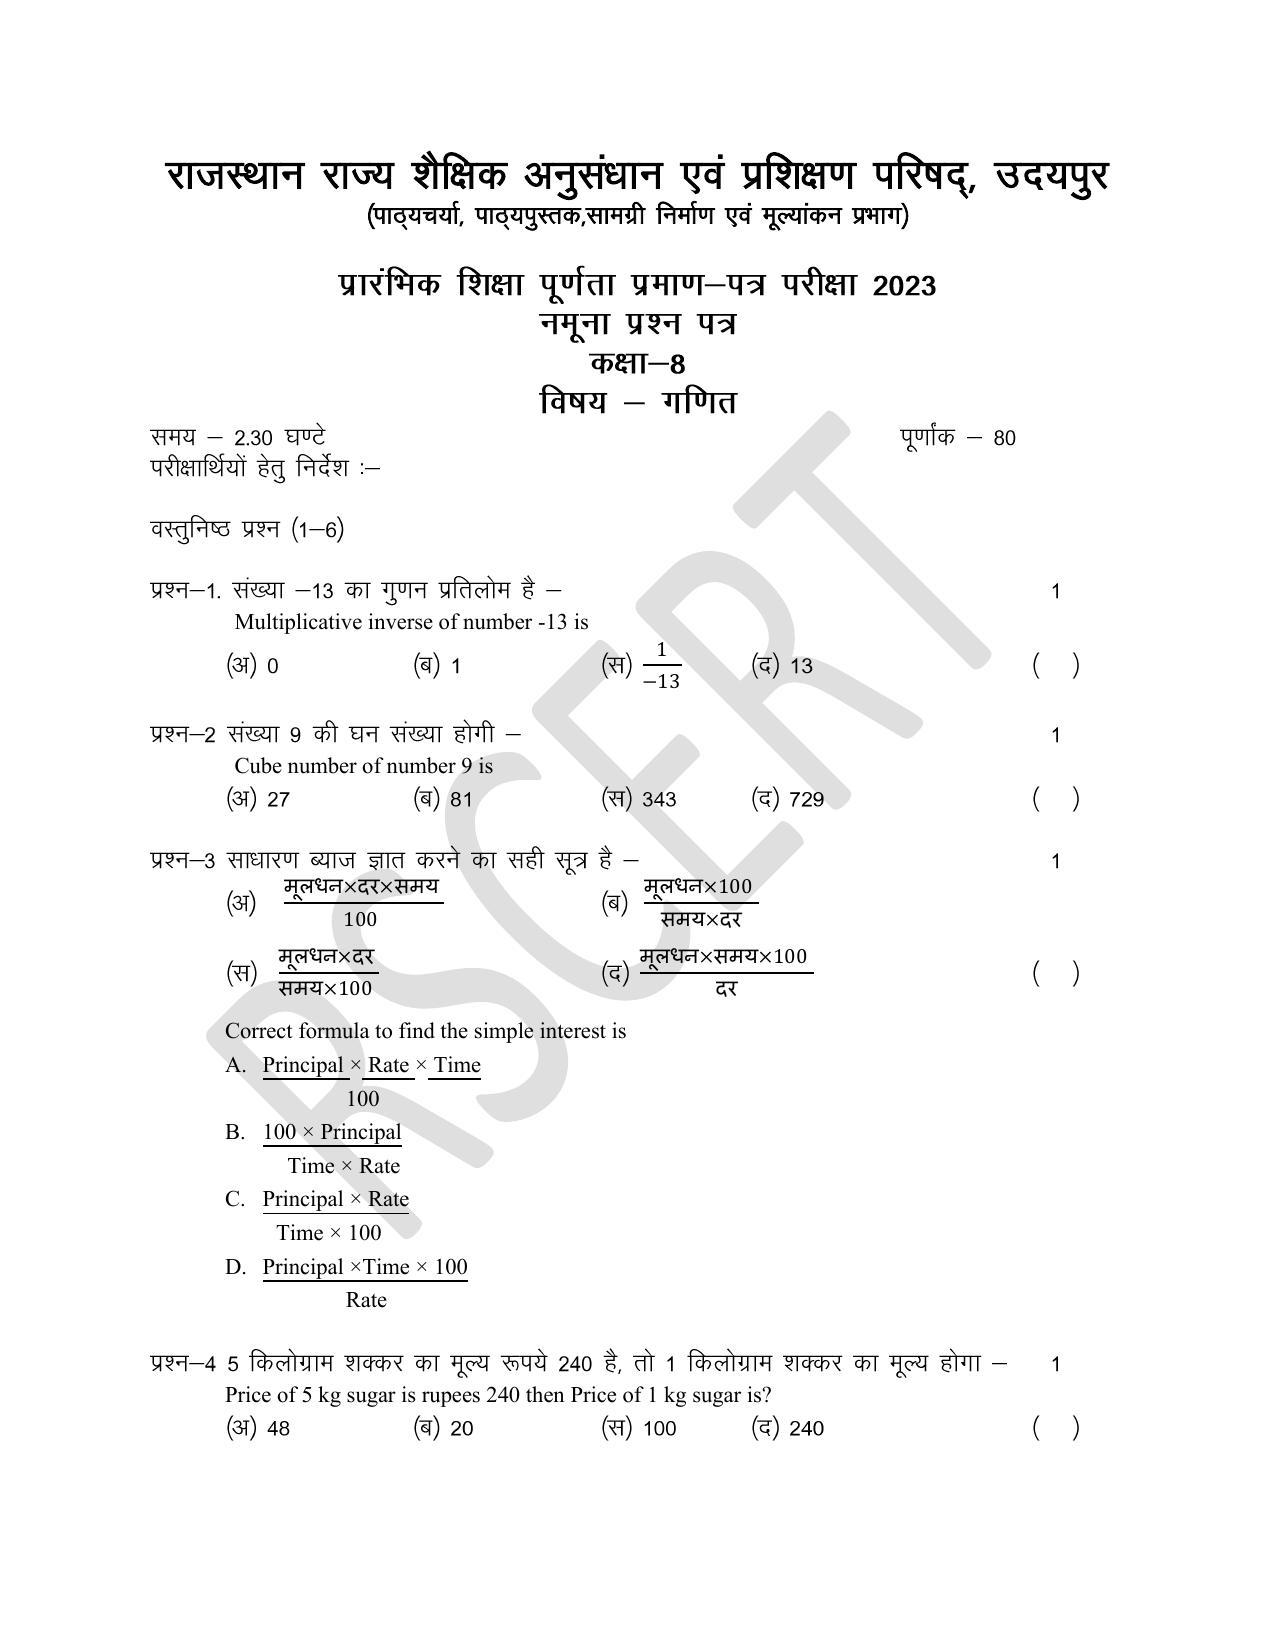 RBSE Class 8 Math & Science Sample Paper 2023 - Page 1